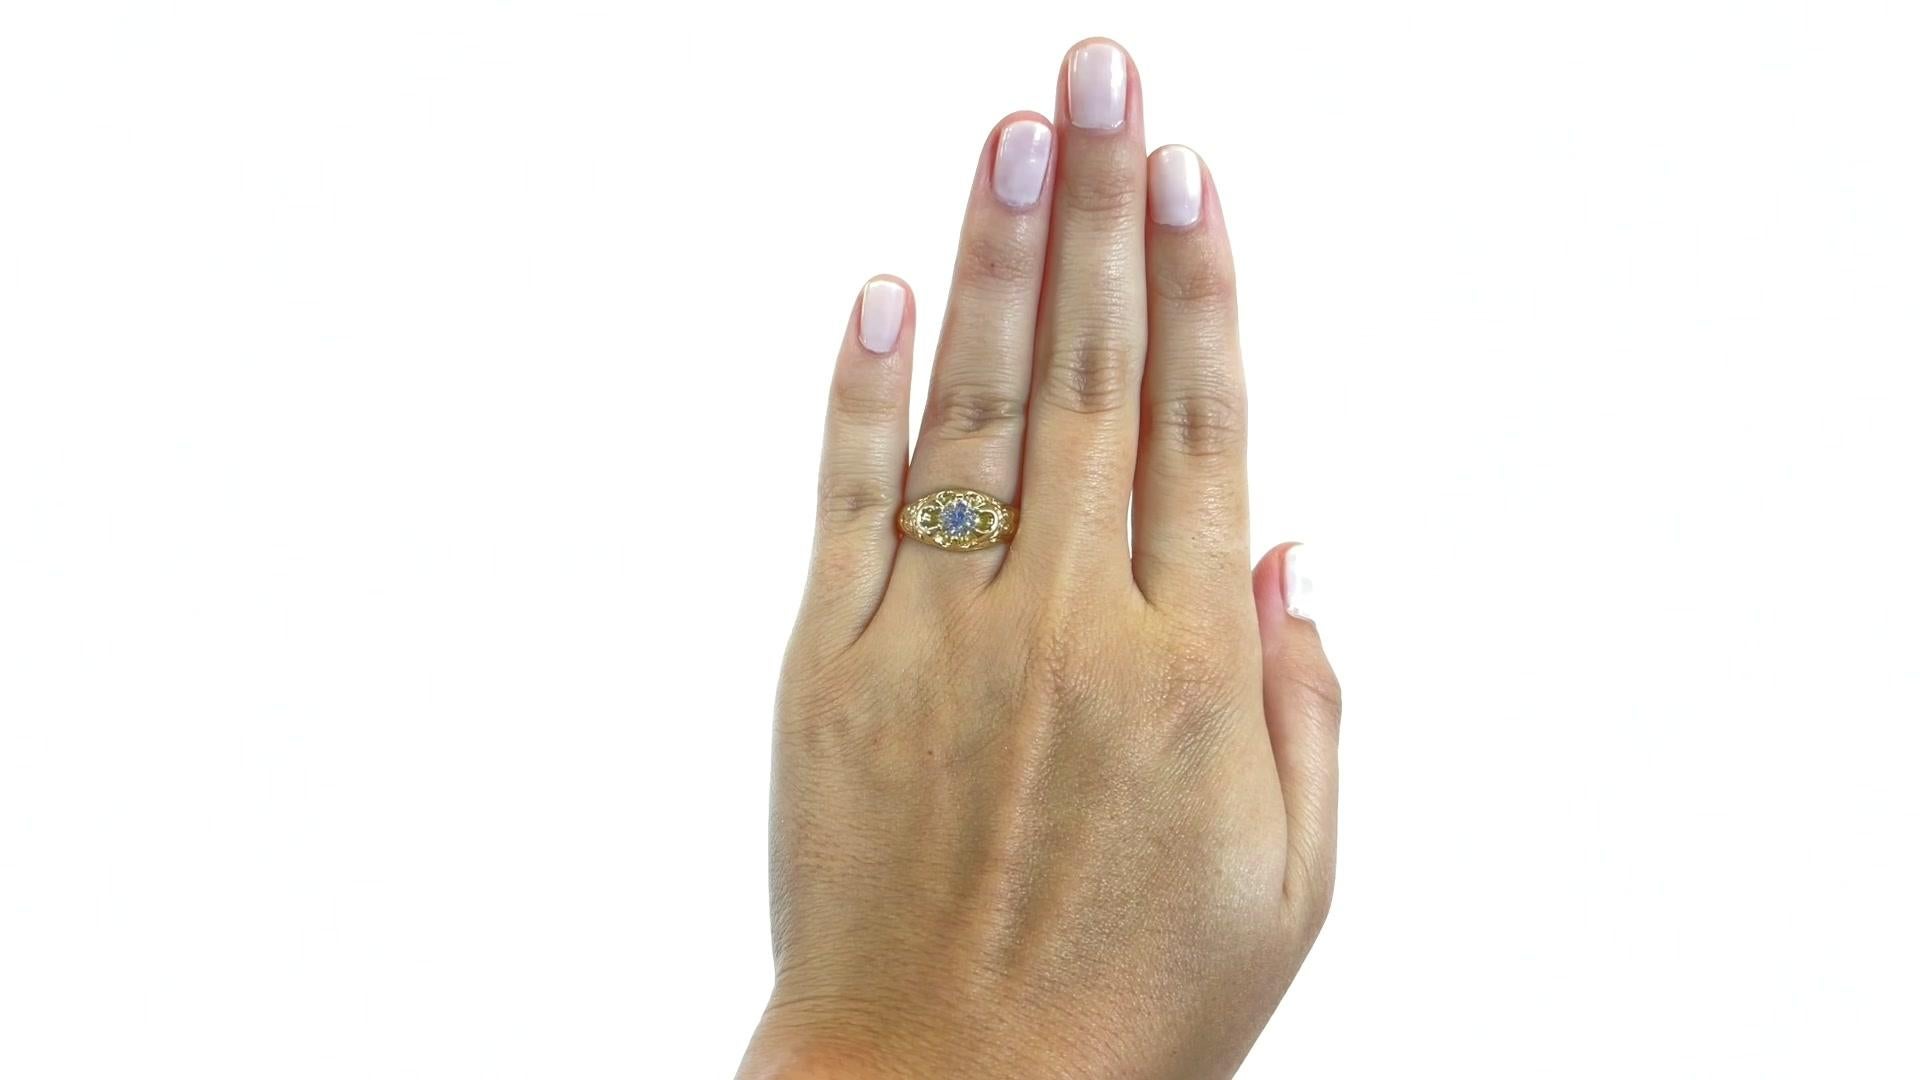 Victorian Revival GIA Round Brilliant Cut Diamond Gold Engagement Ring. The diamond is GIA certified Old European Cut, 0.75 carat, J color, VS2 clarity.(#2215851186). Stamped 14k with maker's mark. Circa 1950s. Size 8 1/2 and can be resized.

About